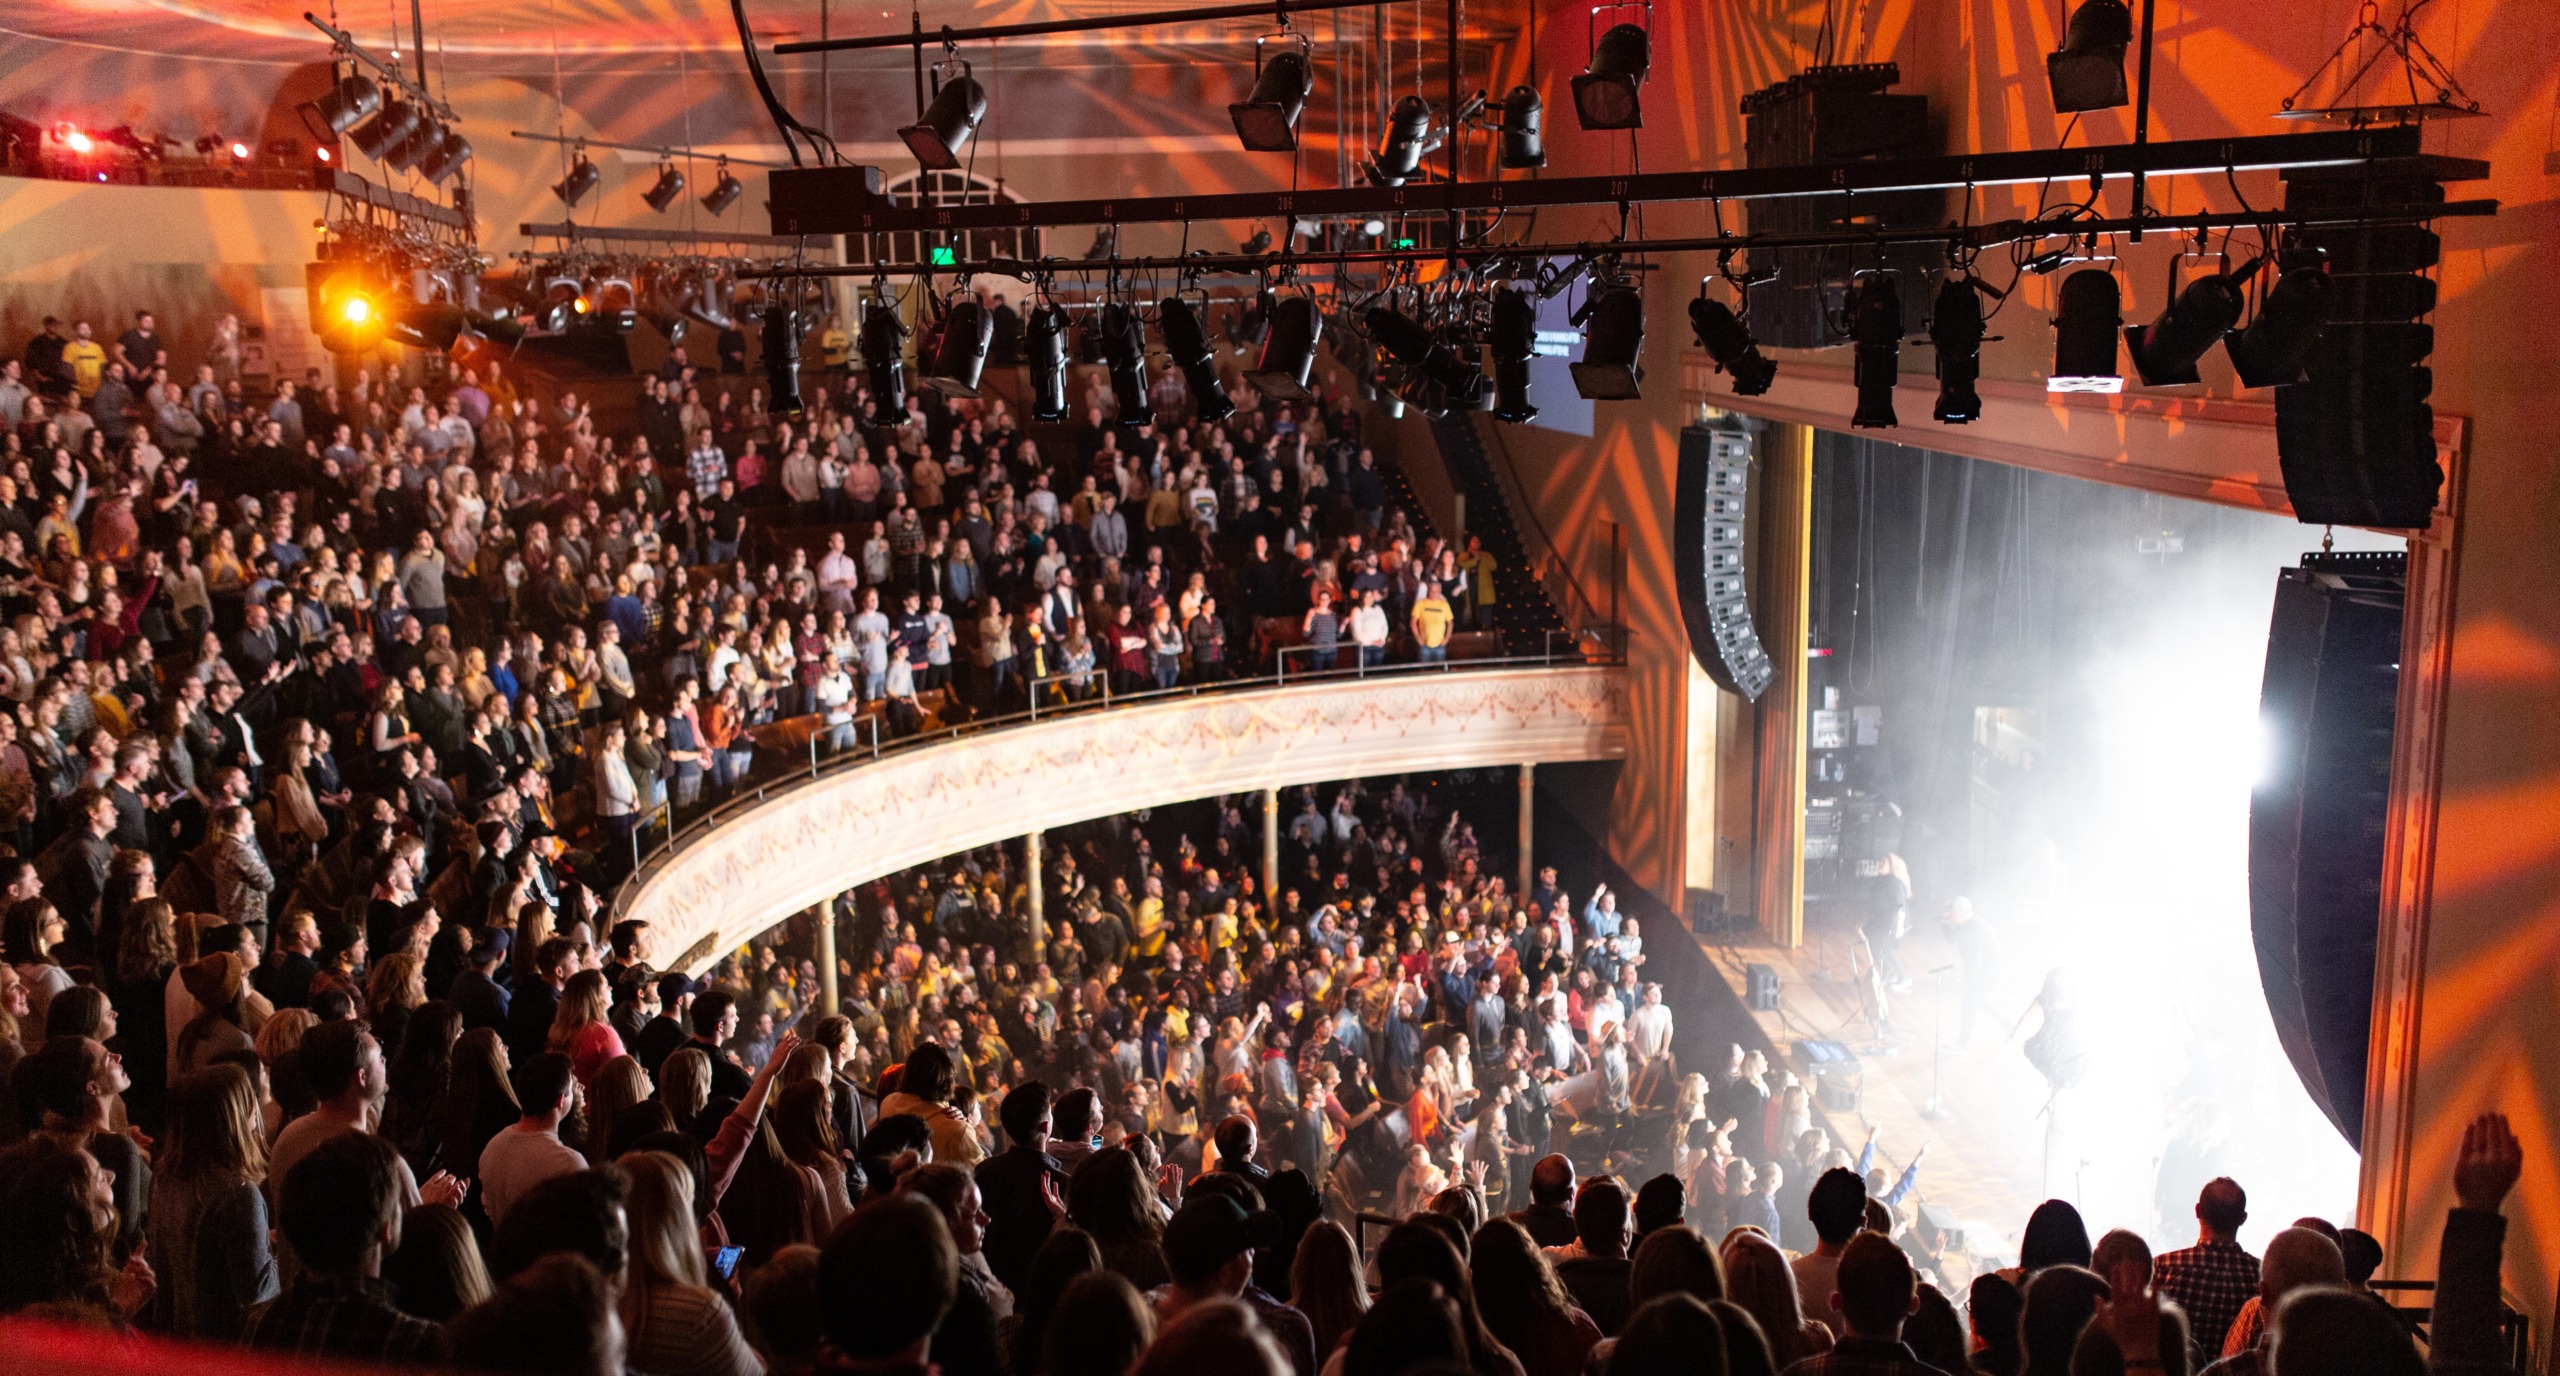 45 Unique things to do in Nashville Experiences You Won't Find Anywhere Else - Visit the Historic Ryman Auditorium